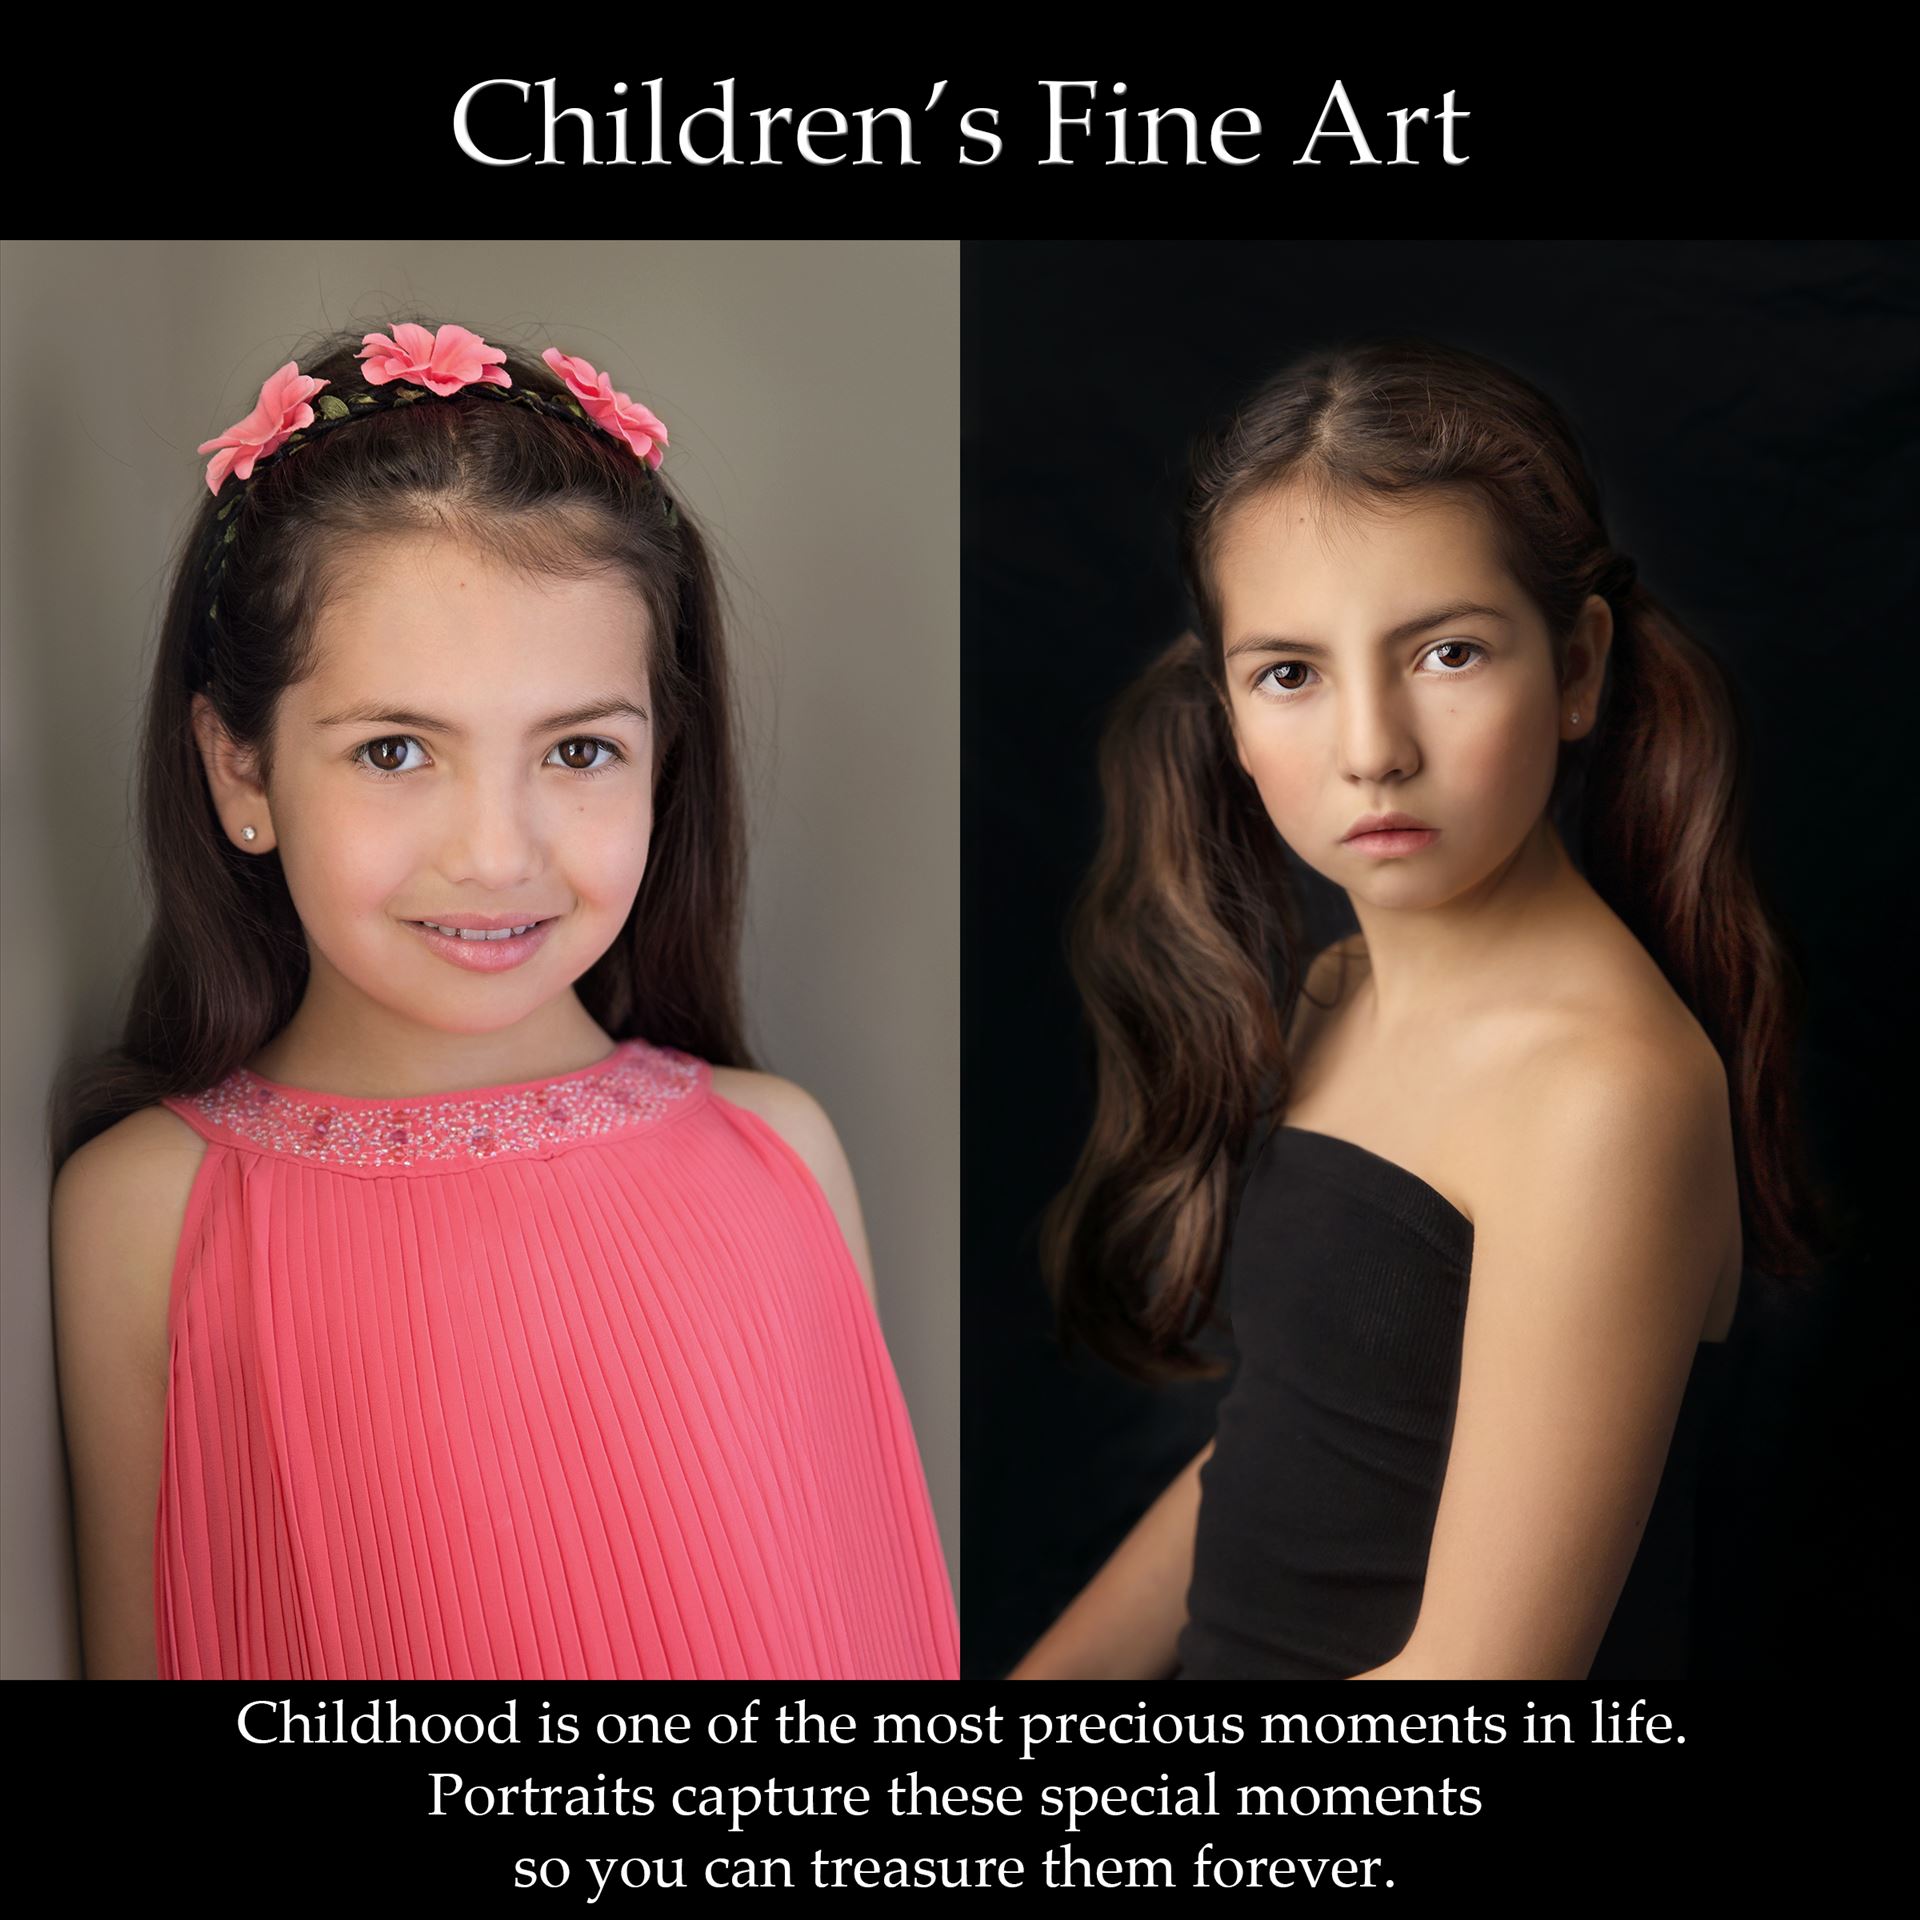 Childrens-Fine-Art.jpg beauty portraits, beauty, portrait, headshot, personal branding by Maria Angelopoulos Photogrpahy